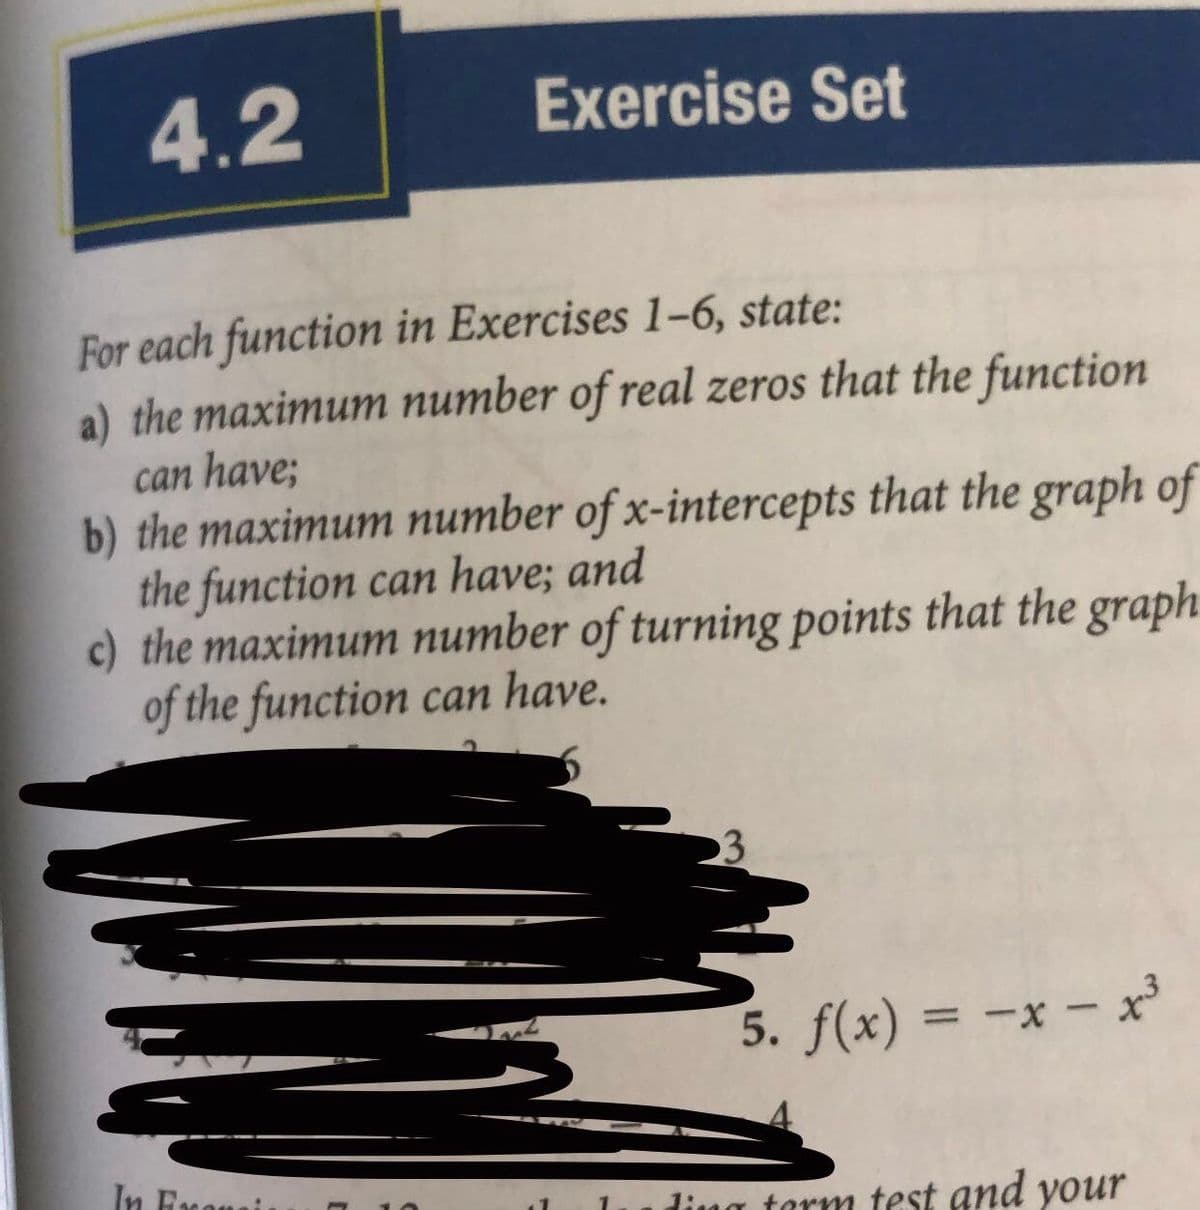 4.2
Exercise Set
For each function in Exercises 1–-6, state:
a) the maximum number of real zeros that the function
can have;
b) the maximum number of x-intercepts that the graph of
the function can have; and
c) the maximum number of turning points that the graph
of the function can have.
5. f(x) = -x- x
%3D
In Eronai
ling tarm test and your
